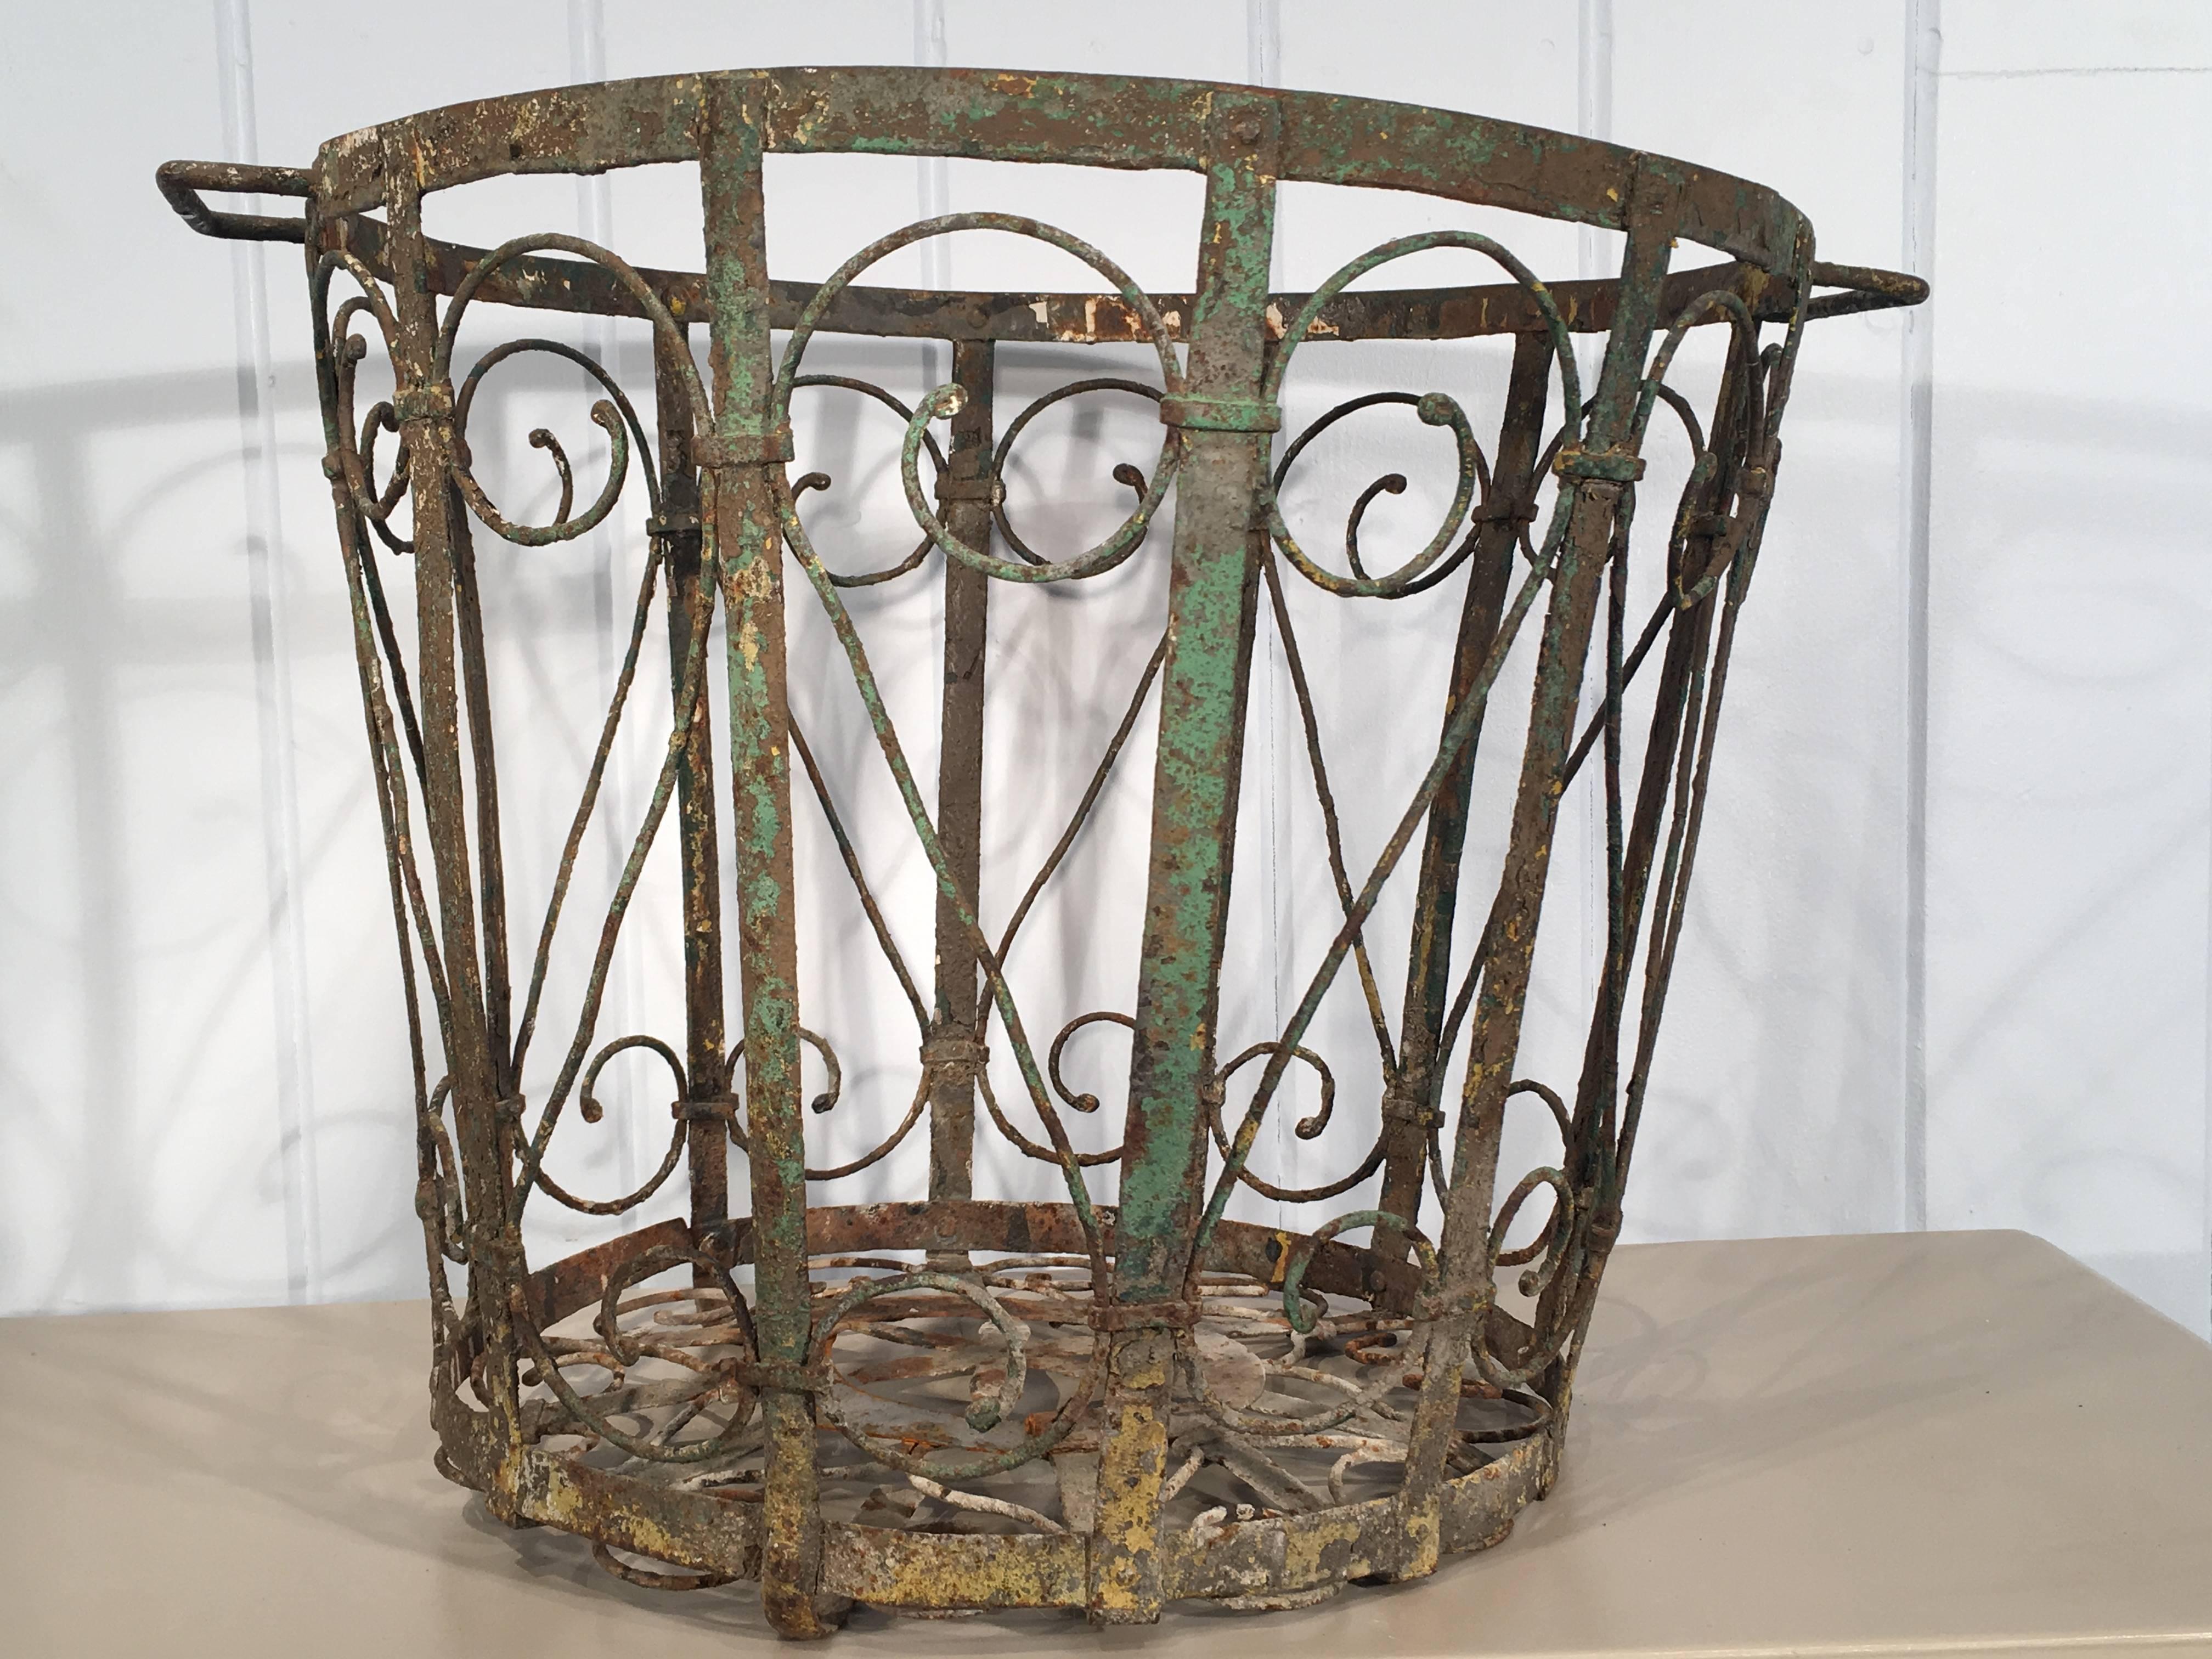 This lovely hand-wrought iron wastepaper basket has a very beautiful design, intricate wire-working and a stunning patina with original blue-green paint. There has been a repair to the bottom by a previous owner in the not so distant past that is